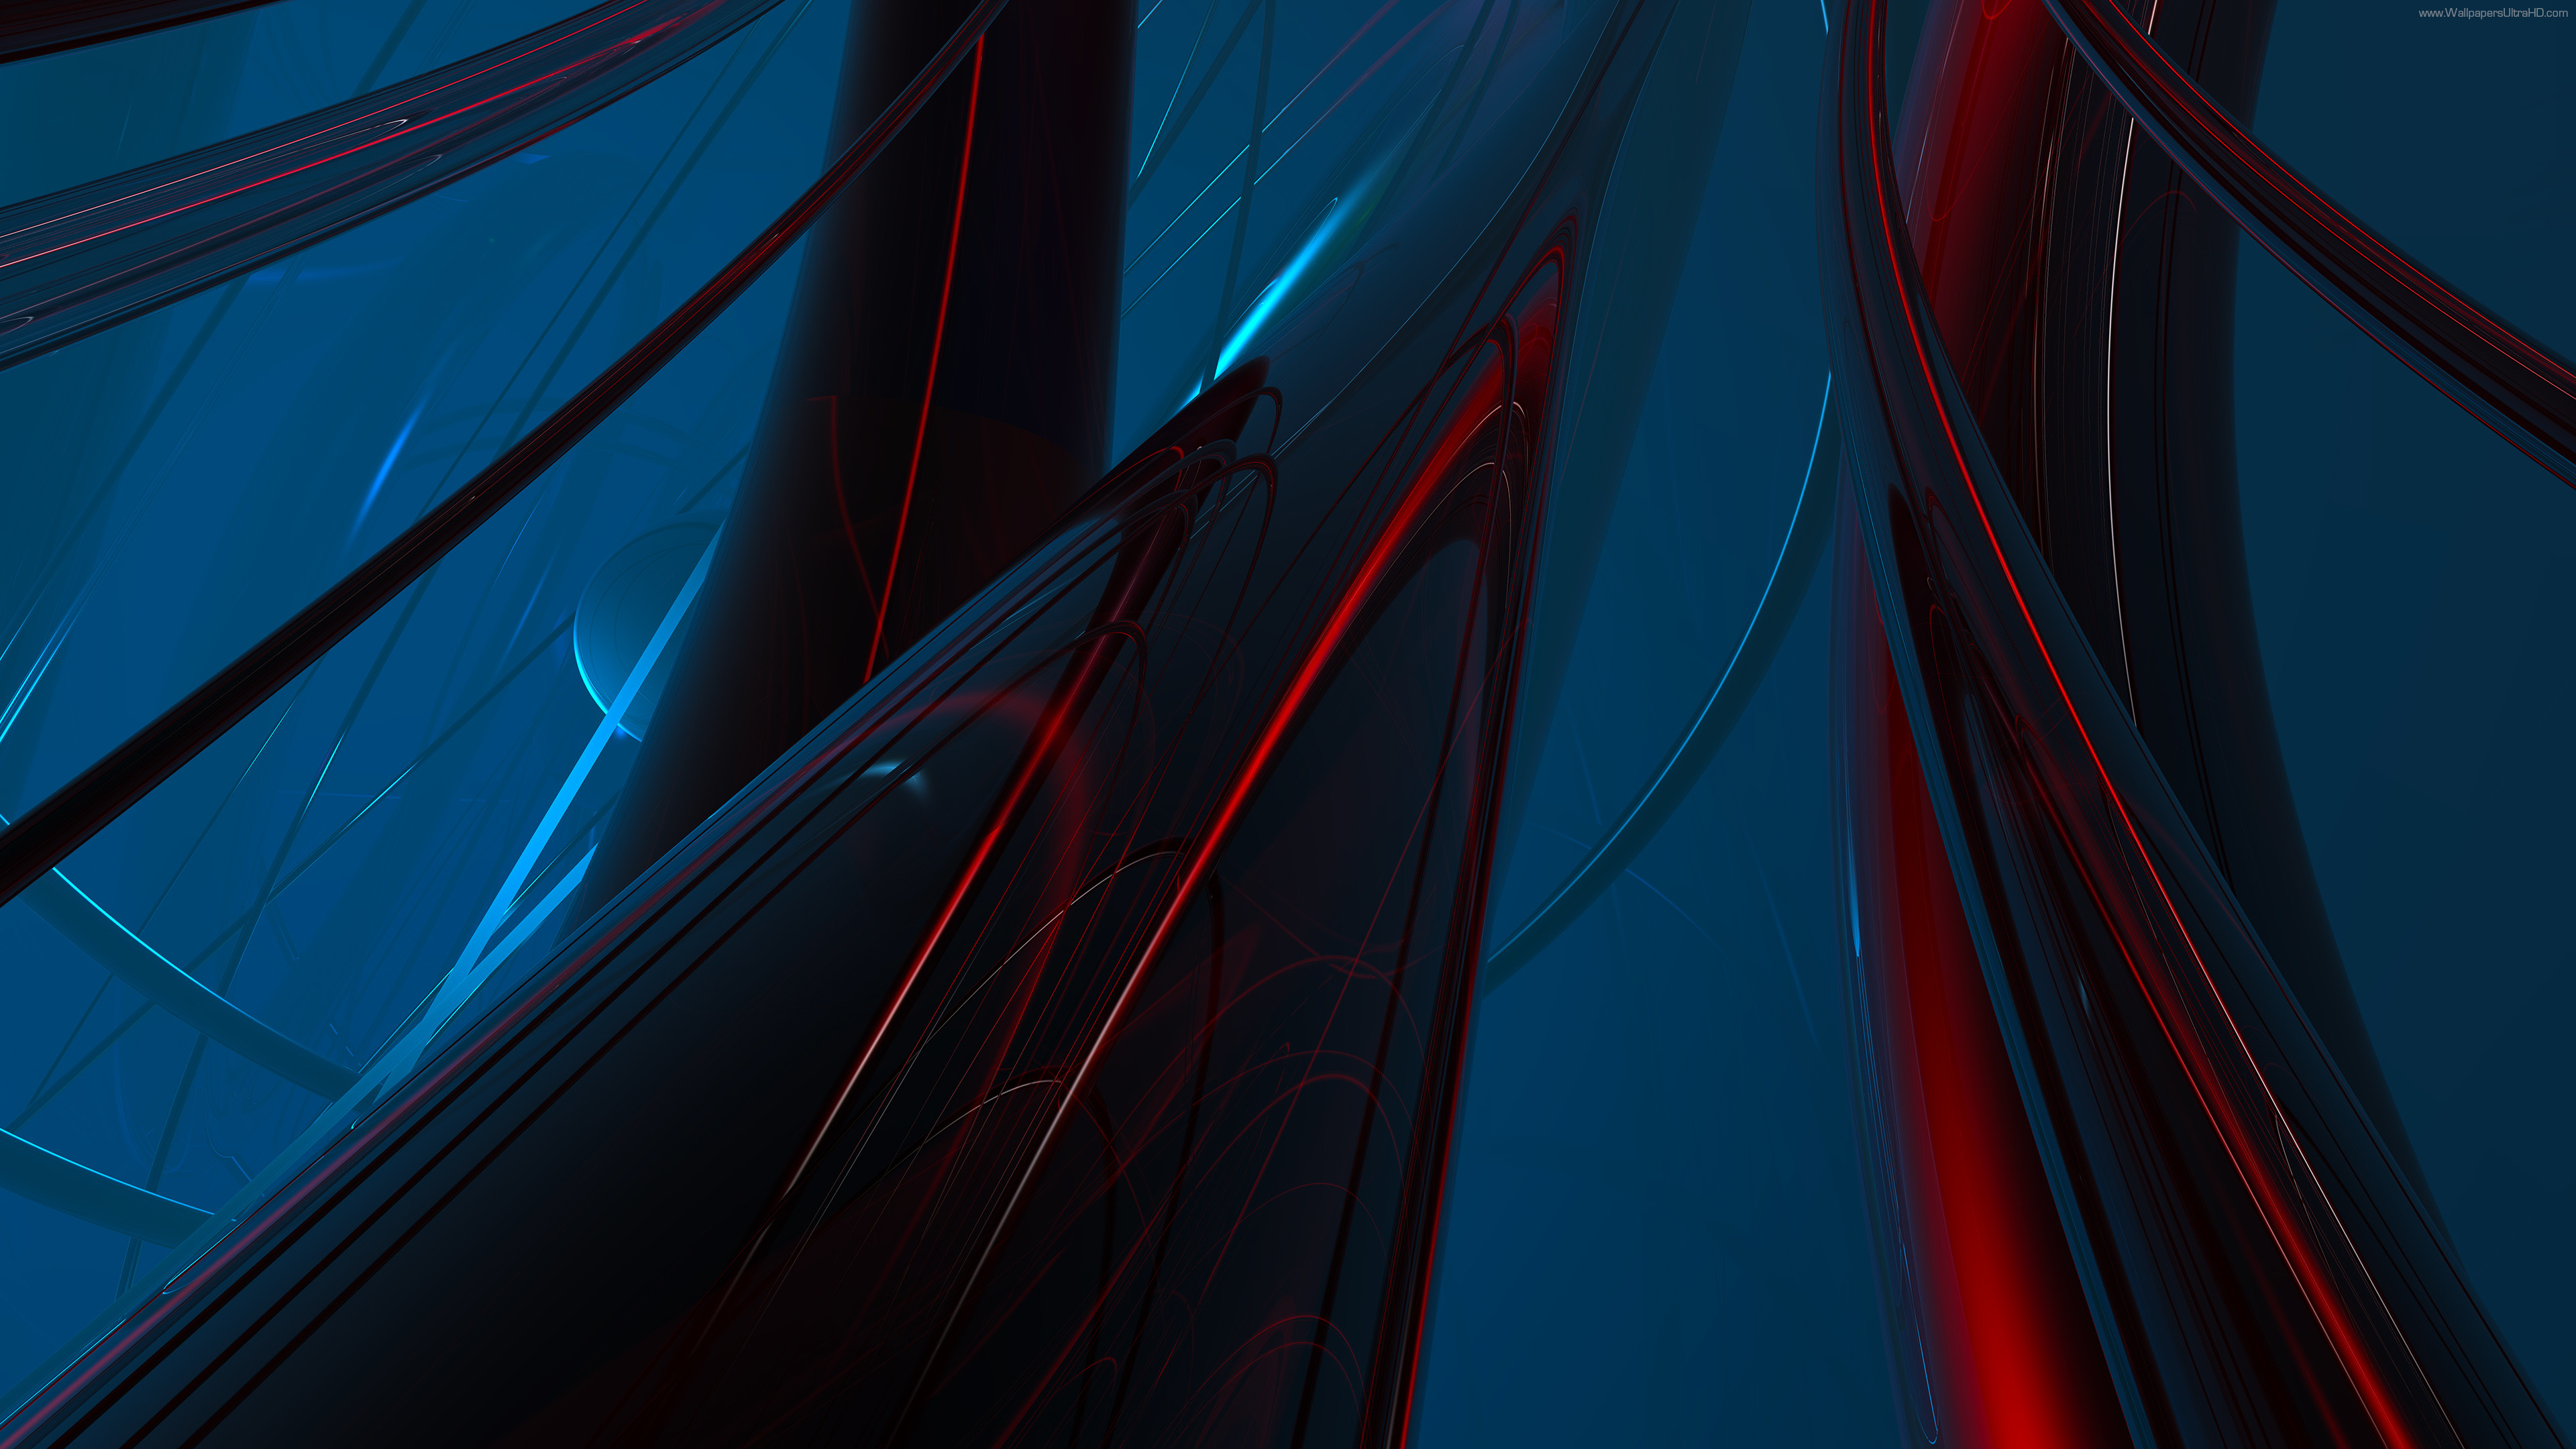 3840x2160 UHD wallpapers 4K Abstract red + blue, Abstract green + purple .